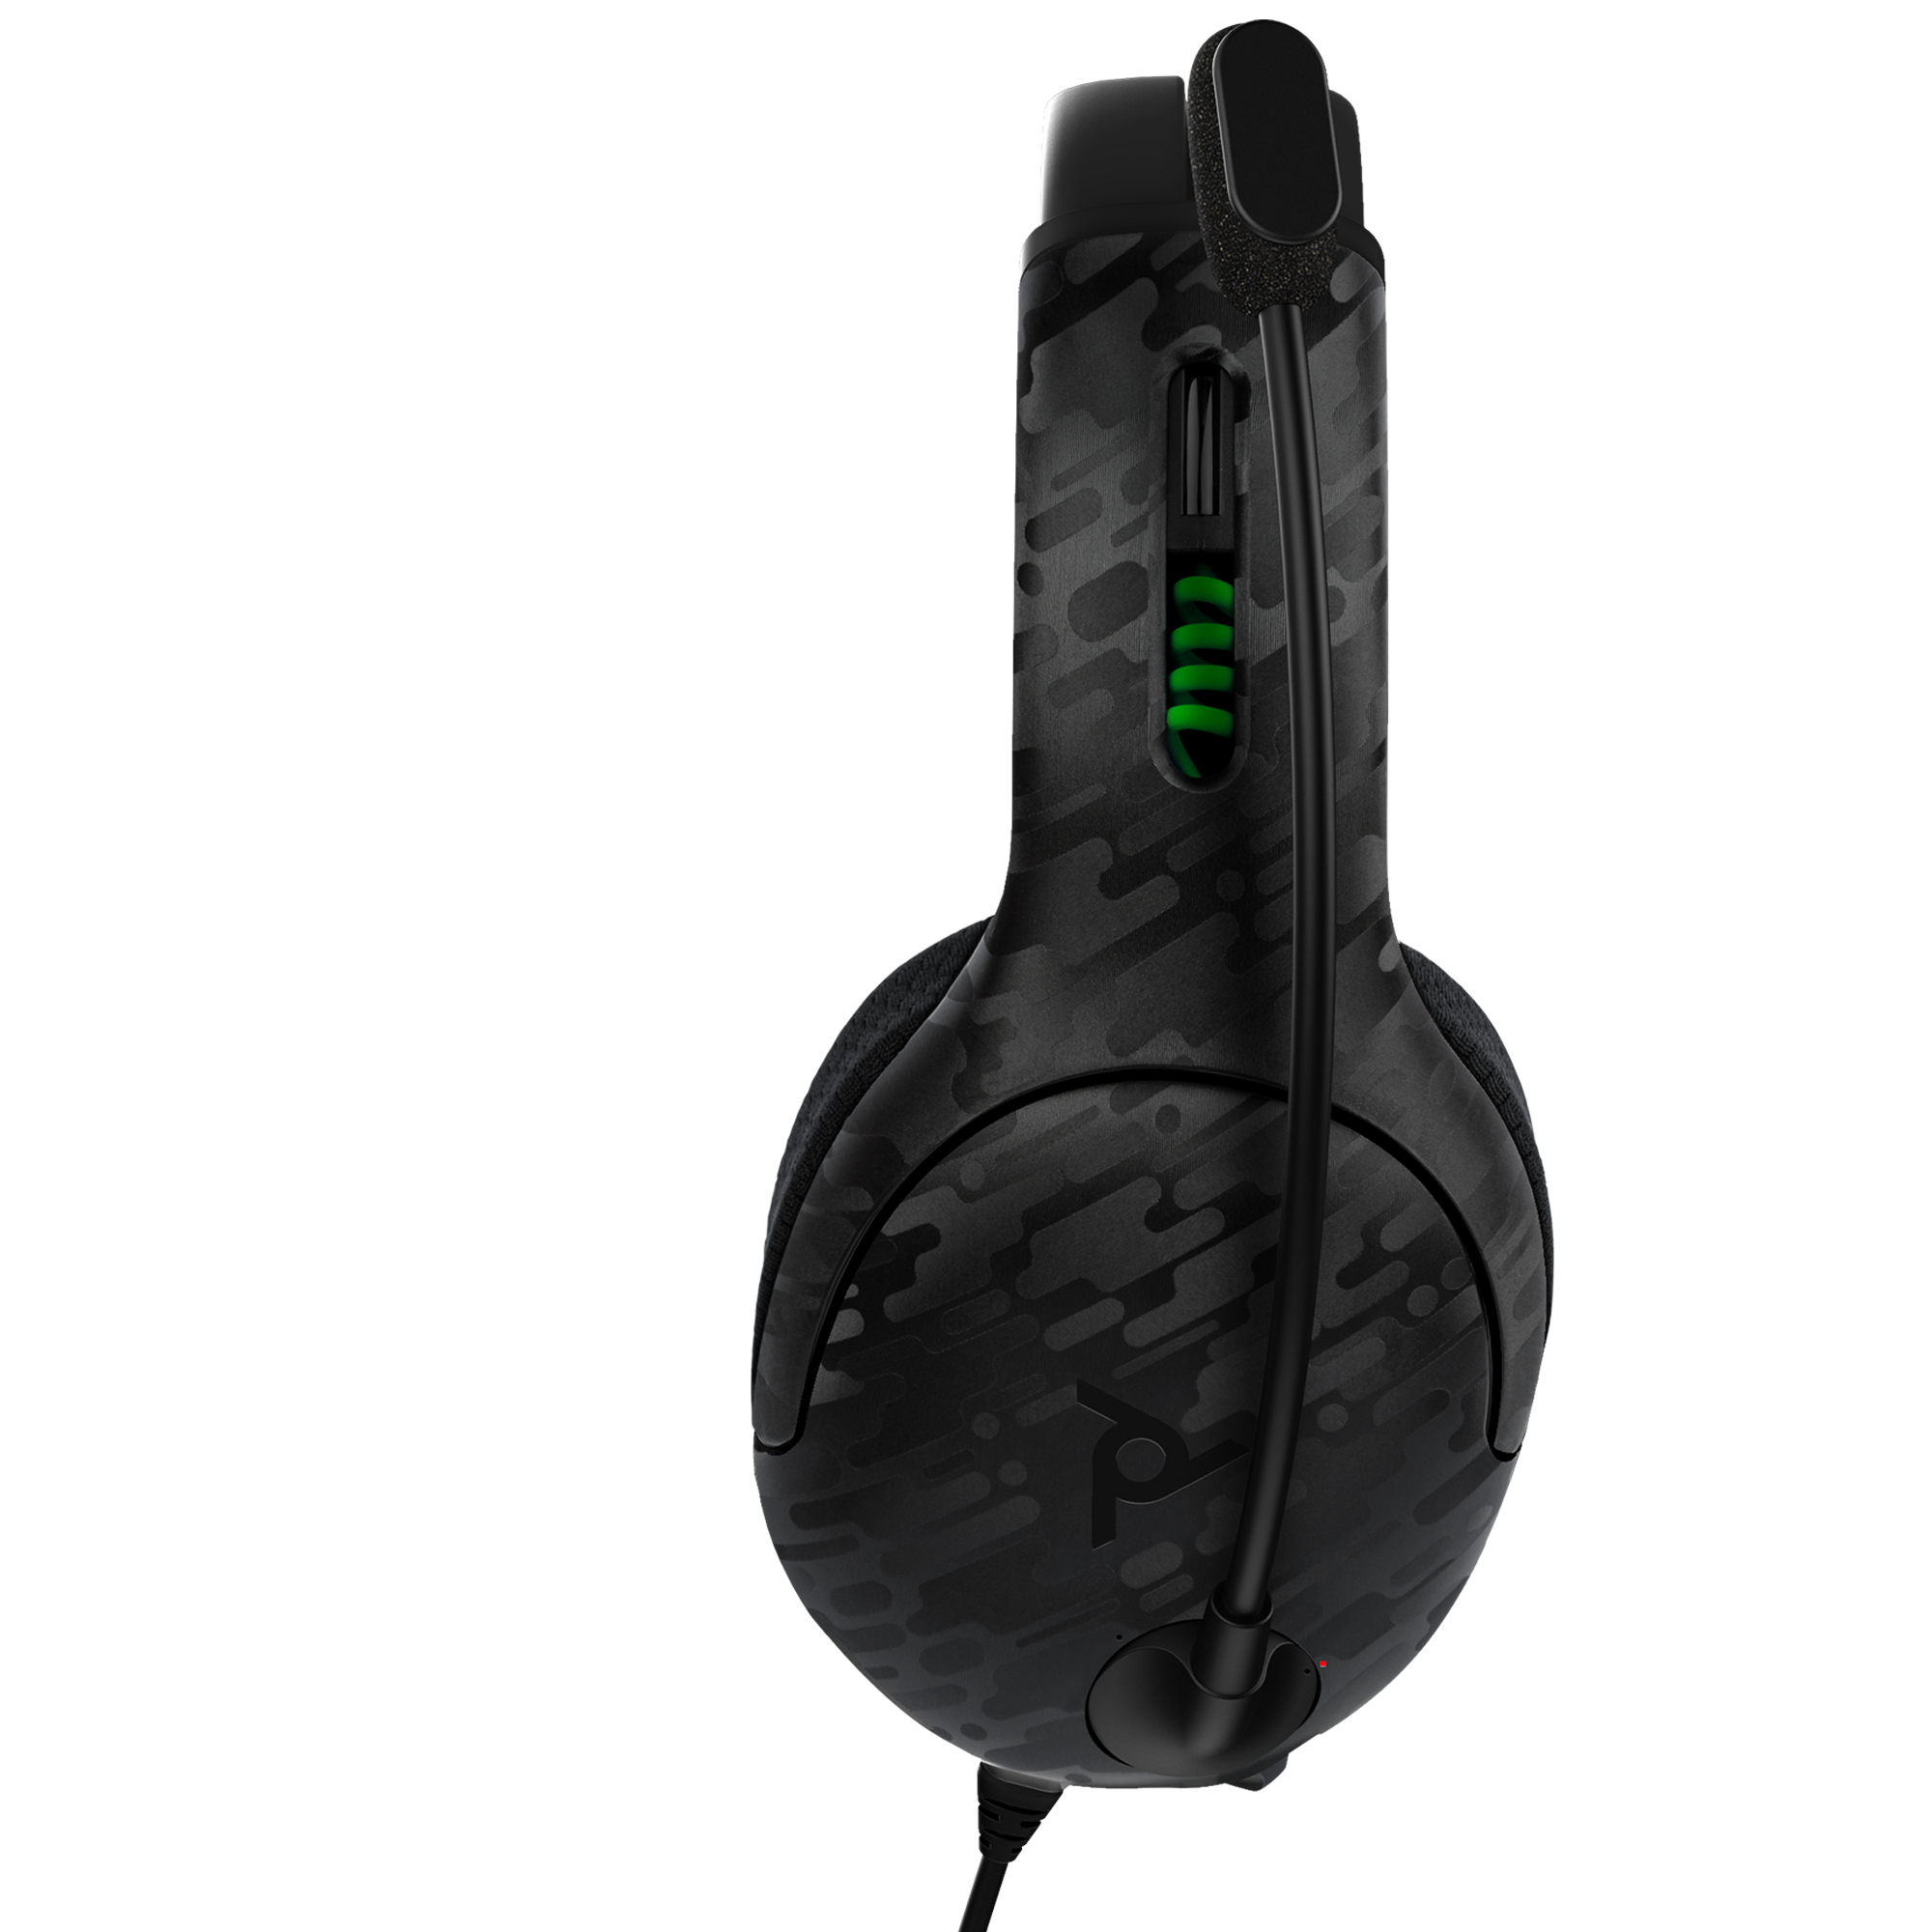 PDP Xbox One Gaming LVL50 Wired Stereo Headset, Black - Lightweight